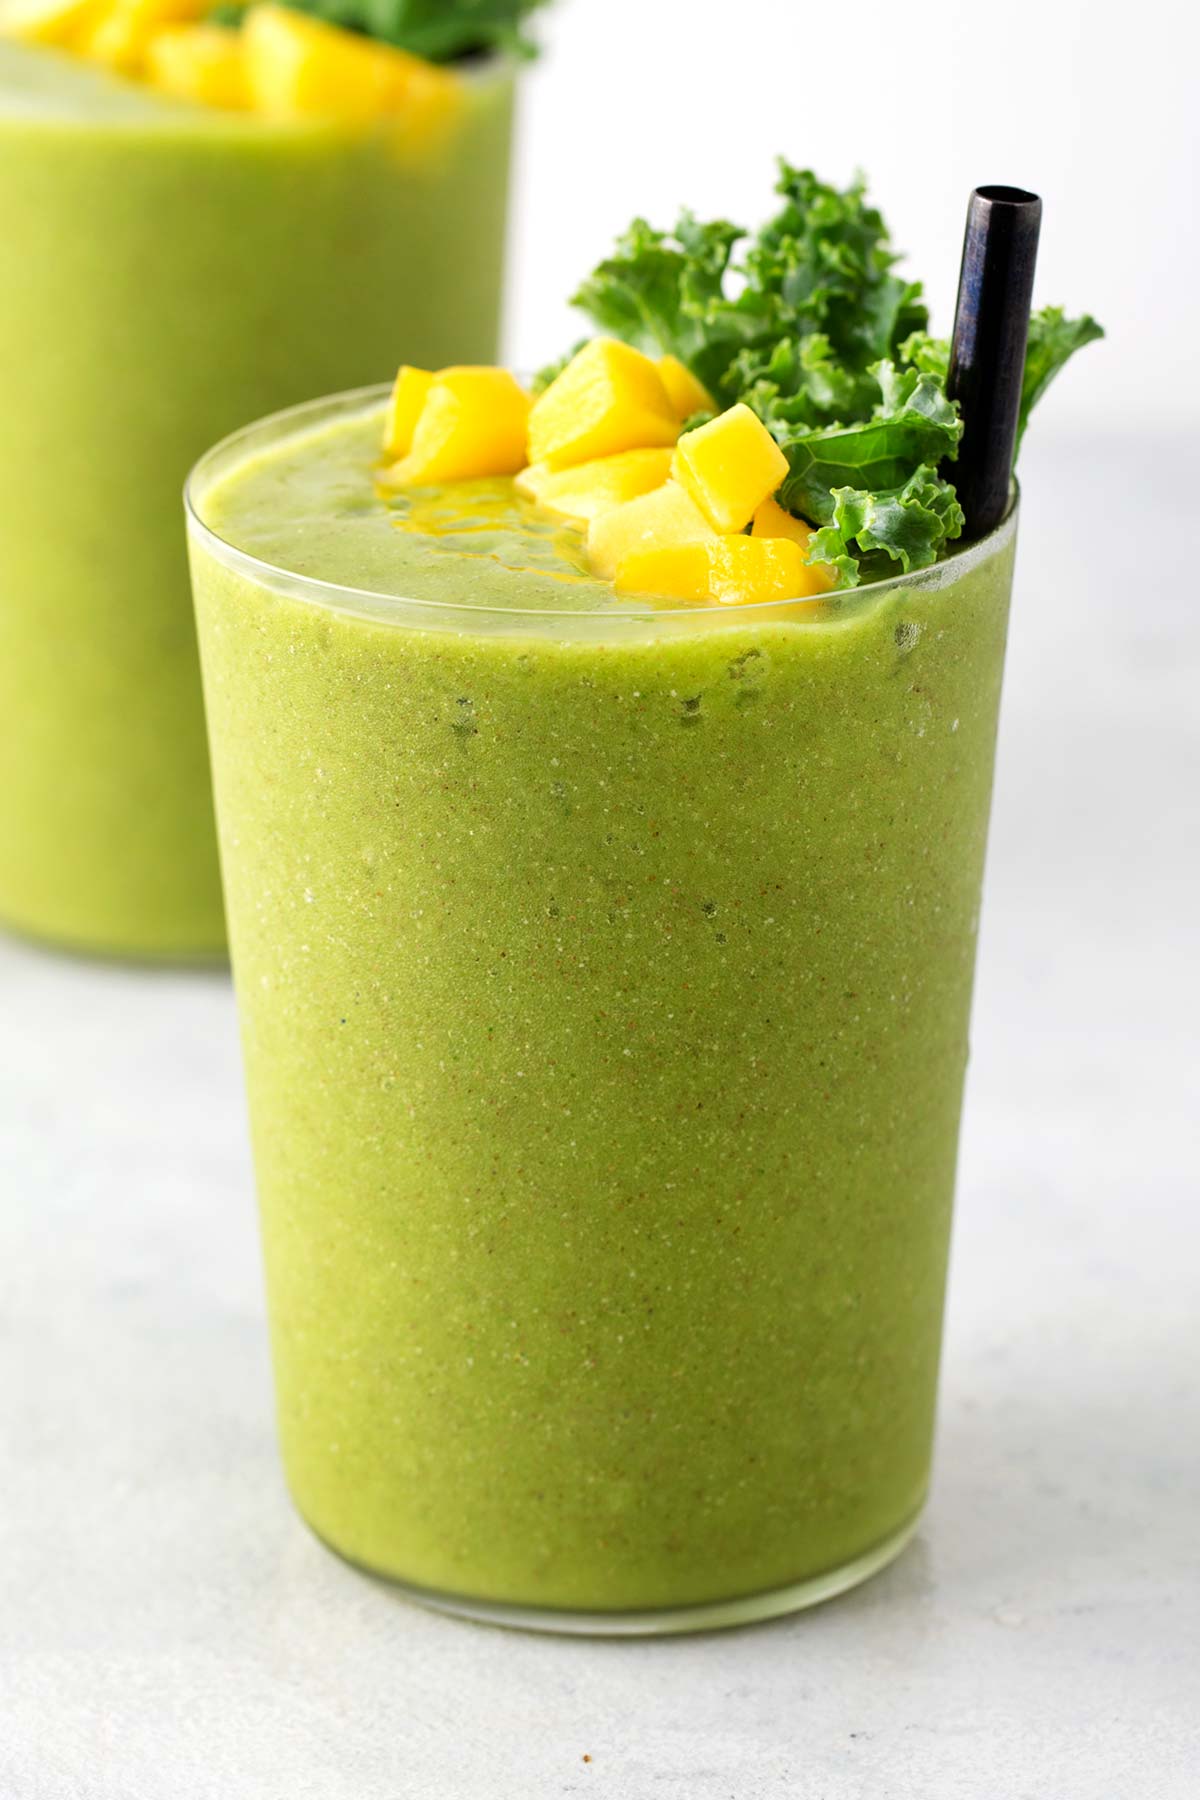 Kale smoothie in a glass.